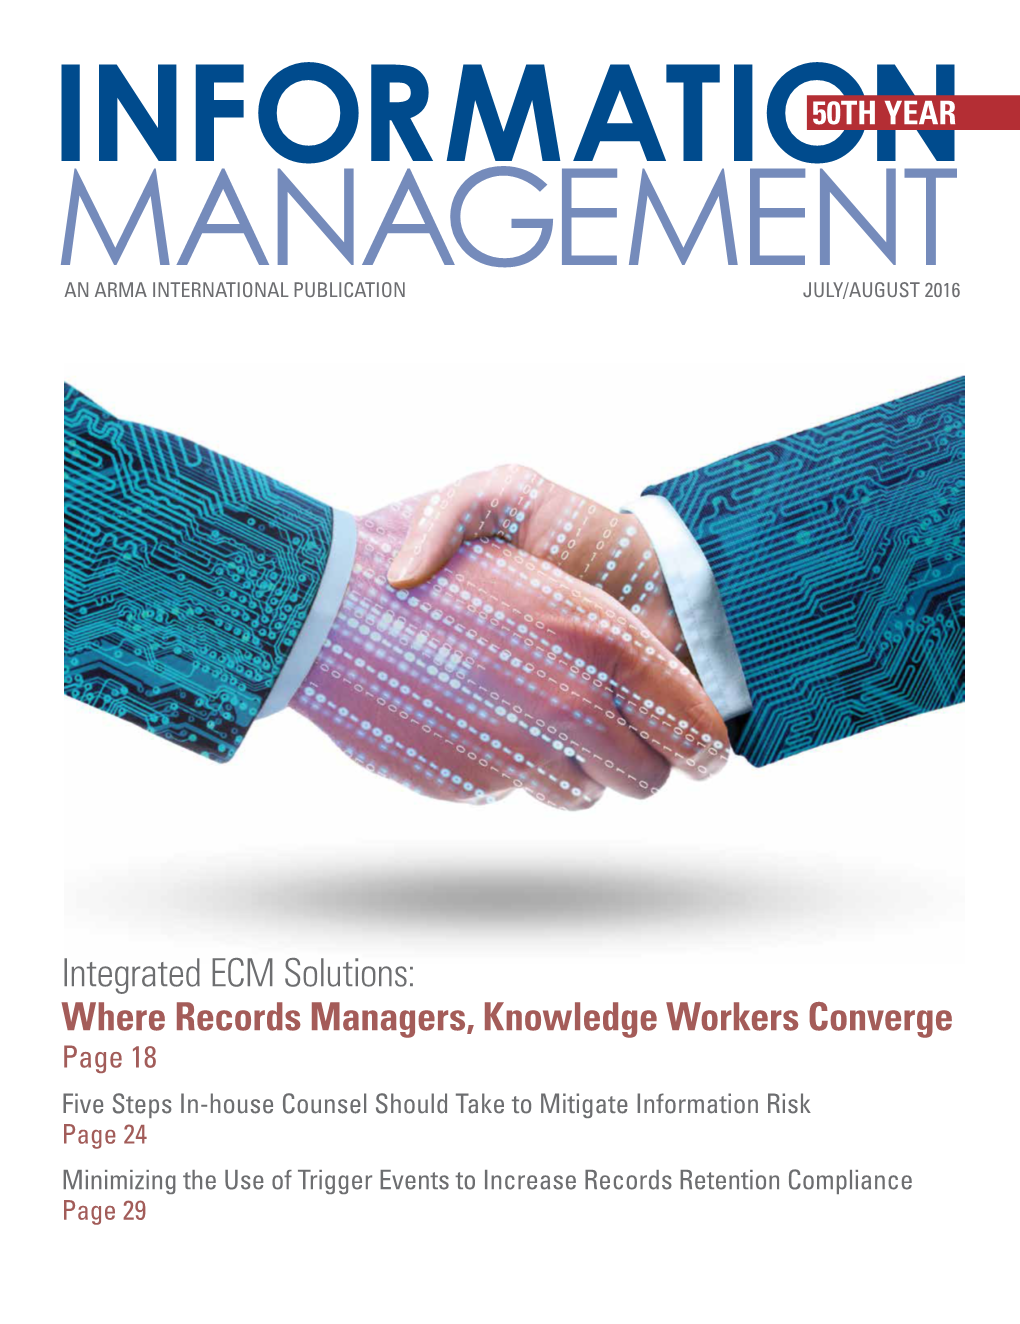 Integrated ECM Solutions: Where Records Managers, Knowledge